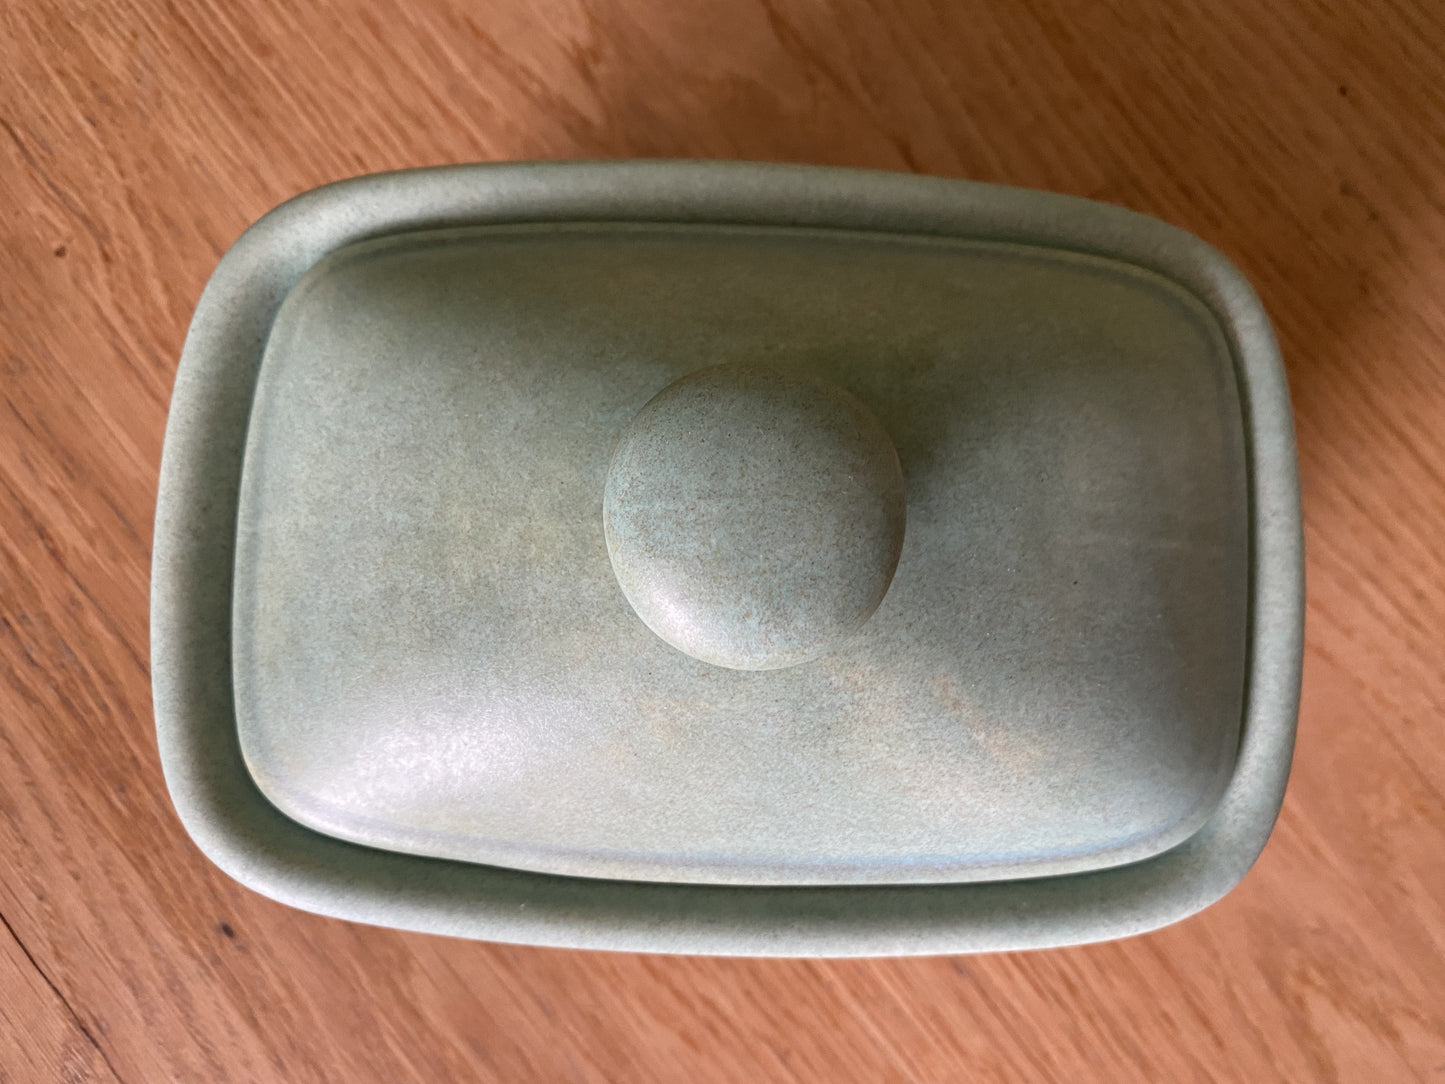 Butter Dish with Lid - Cornish Copper Glaze